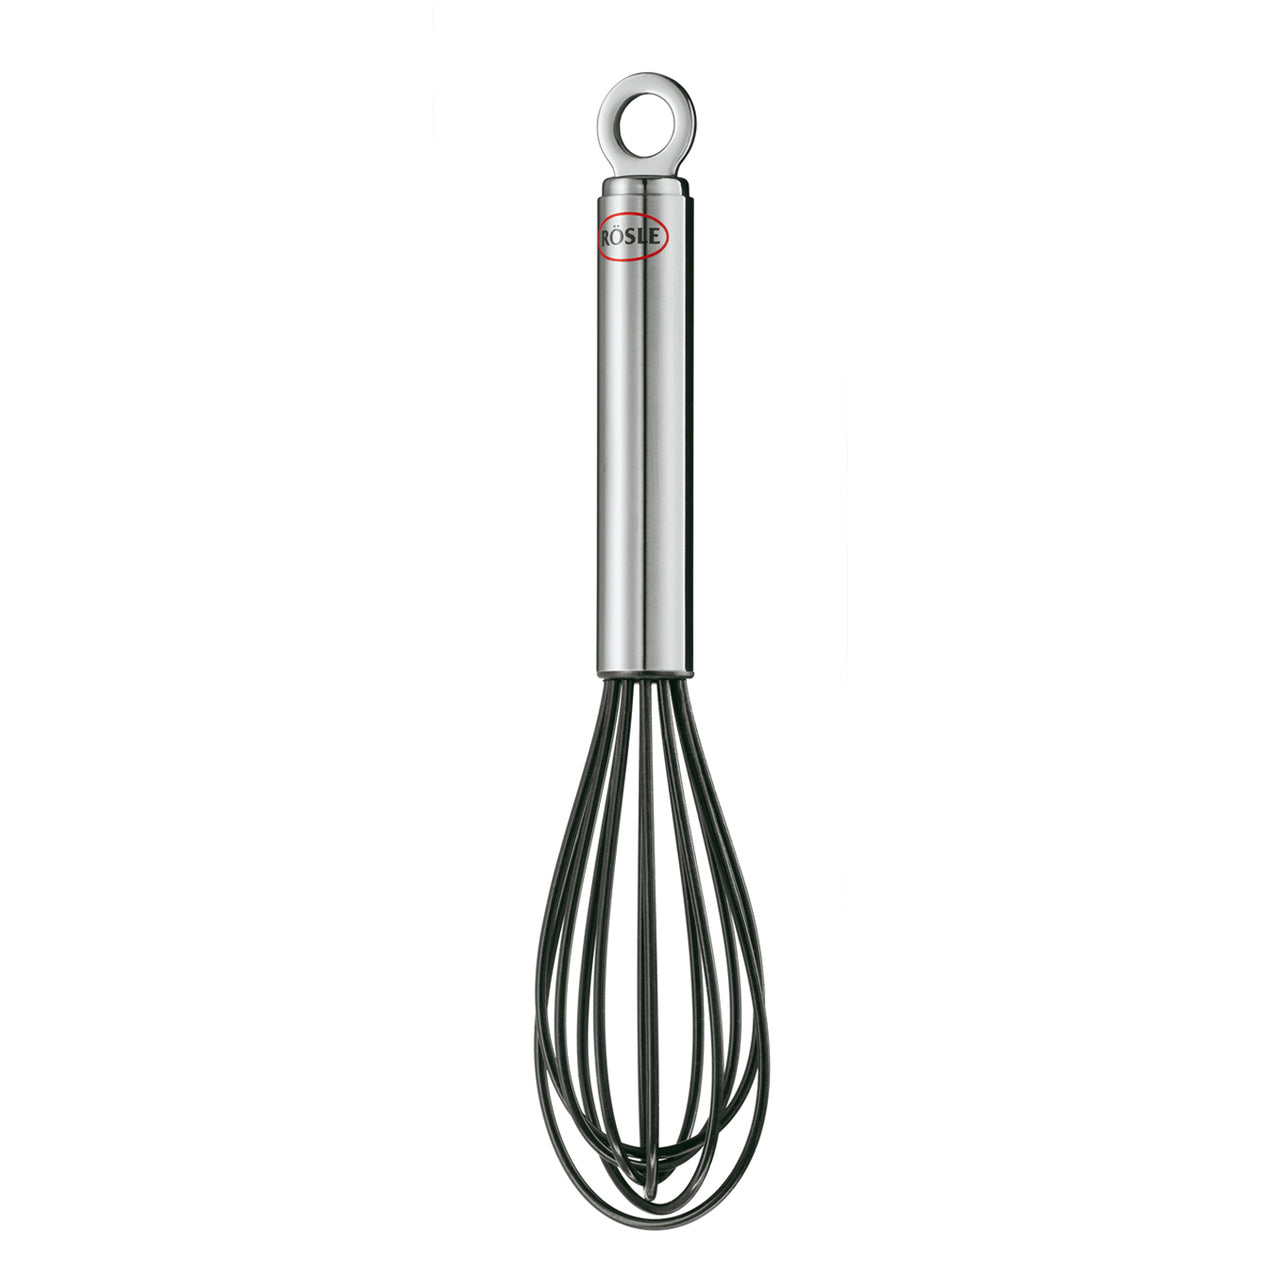 Rosle Egg Whisk with Silicone